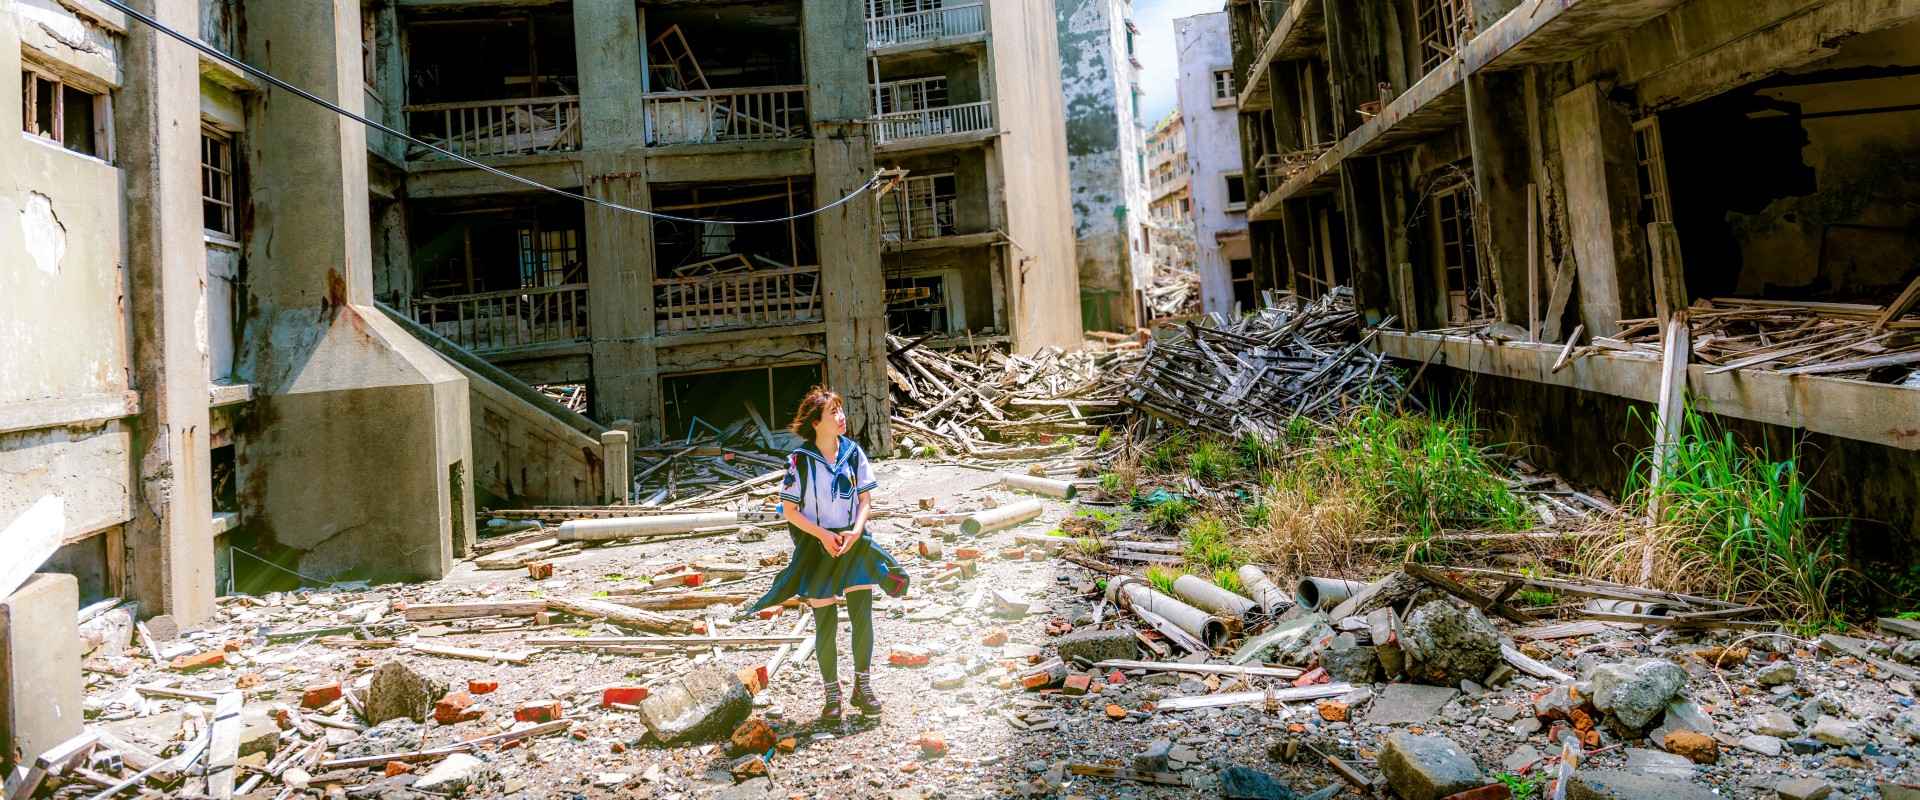 Child wanders though zone of destroyed buildings in war zone